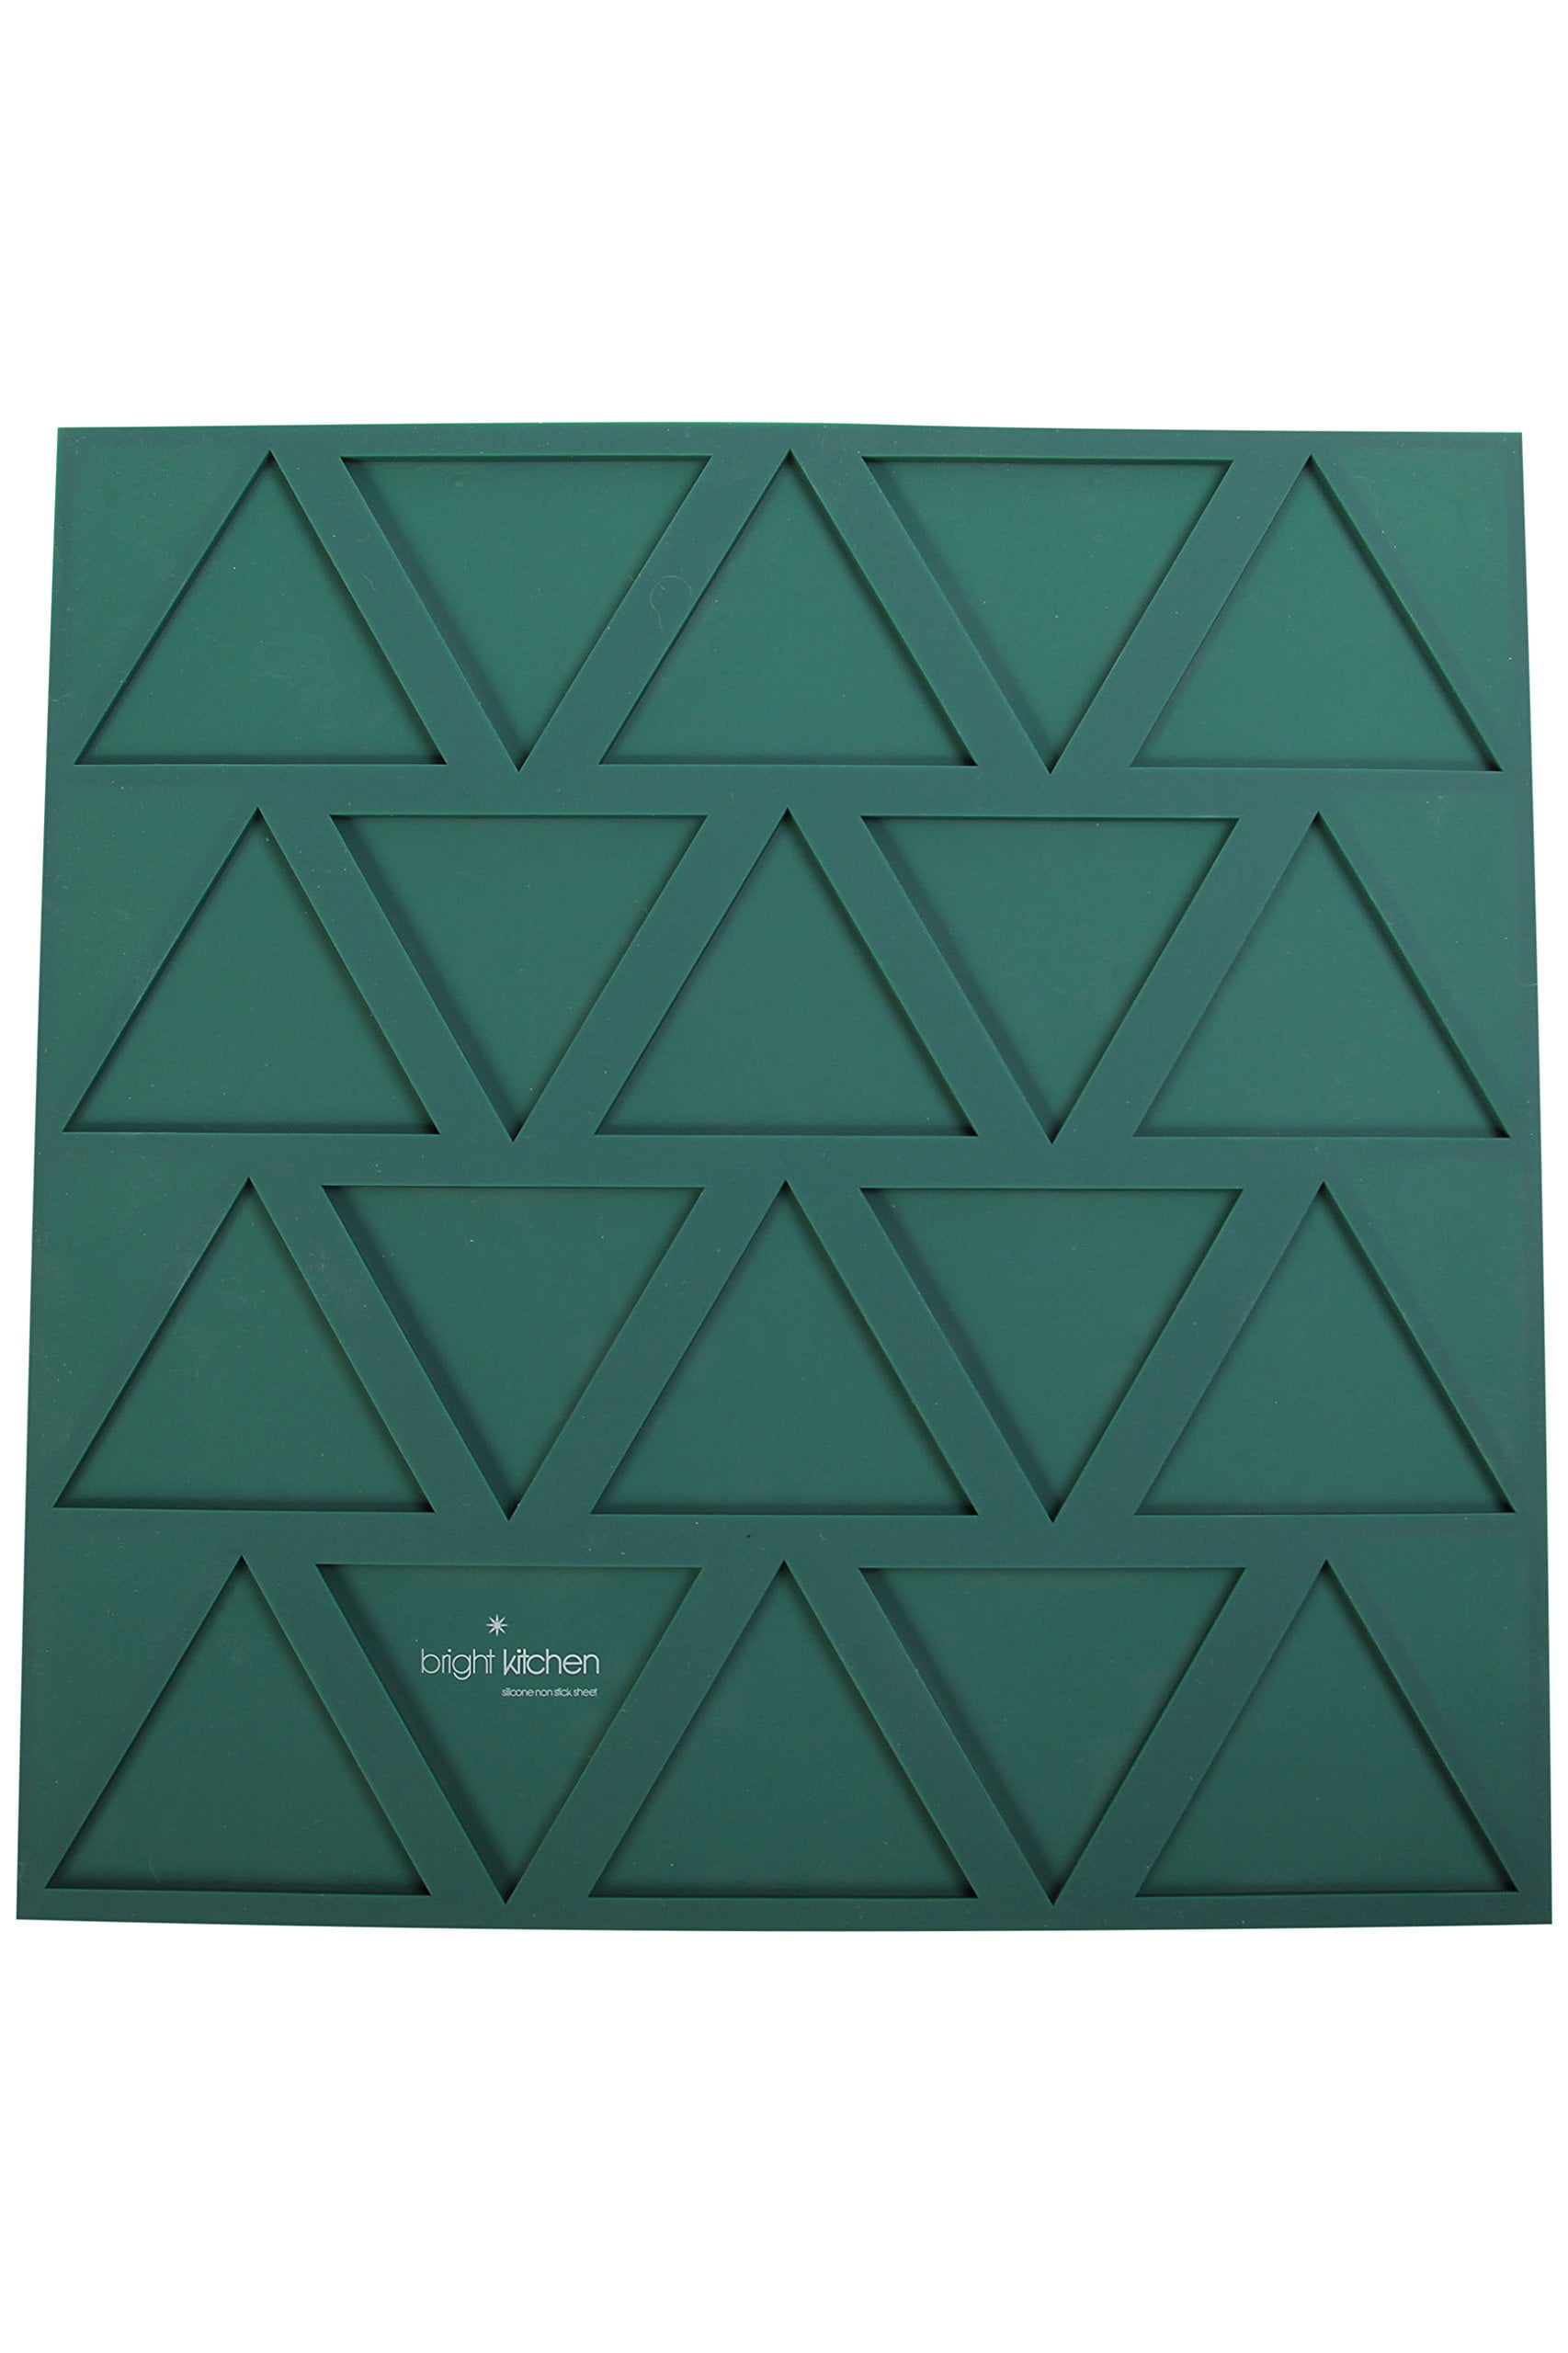 9 Set of 9-14 x 14 Silicone Sheets for Excalibur Dehydrator Bright Kitchen Re-Usable Non-Stick Mat 